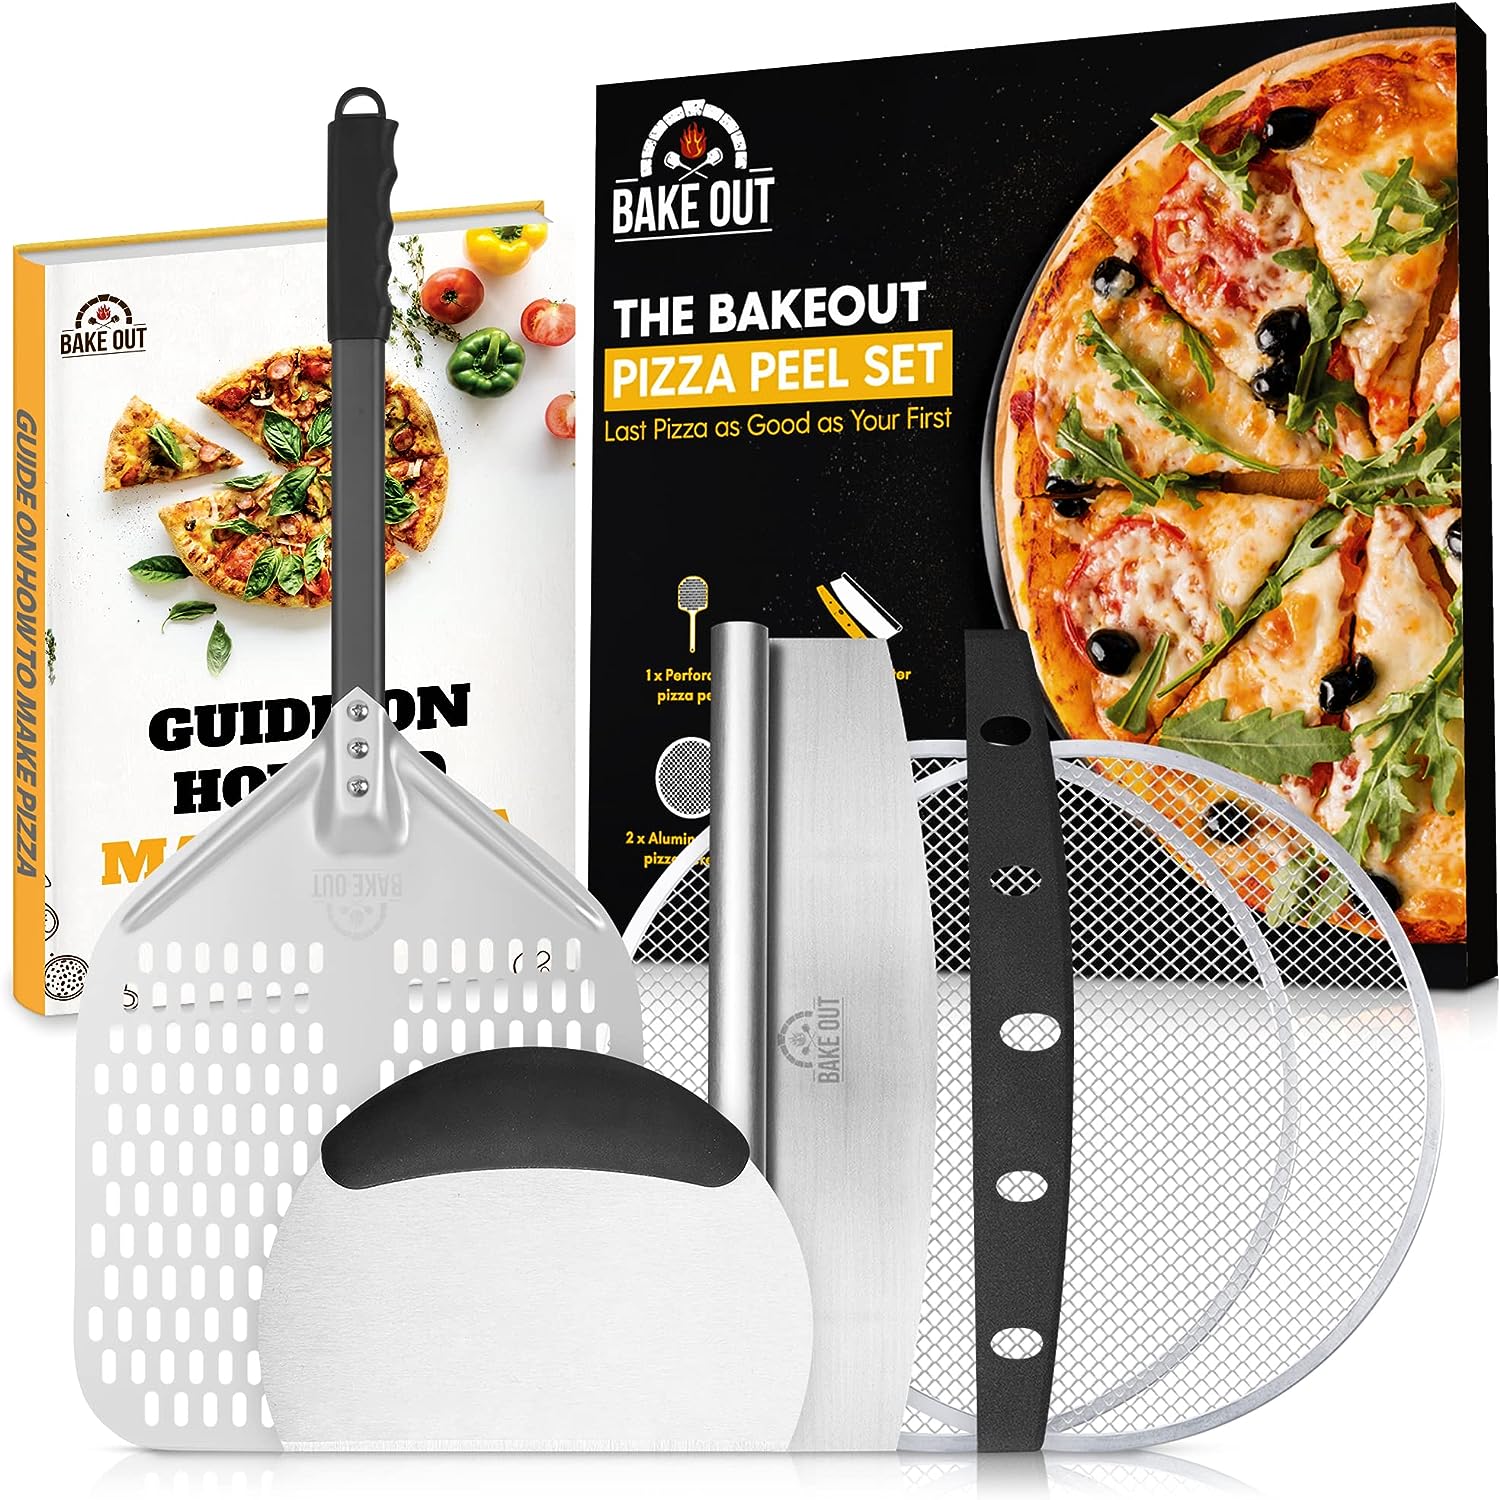 AKE OUT Perforated Pizza Peel Set